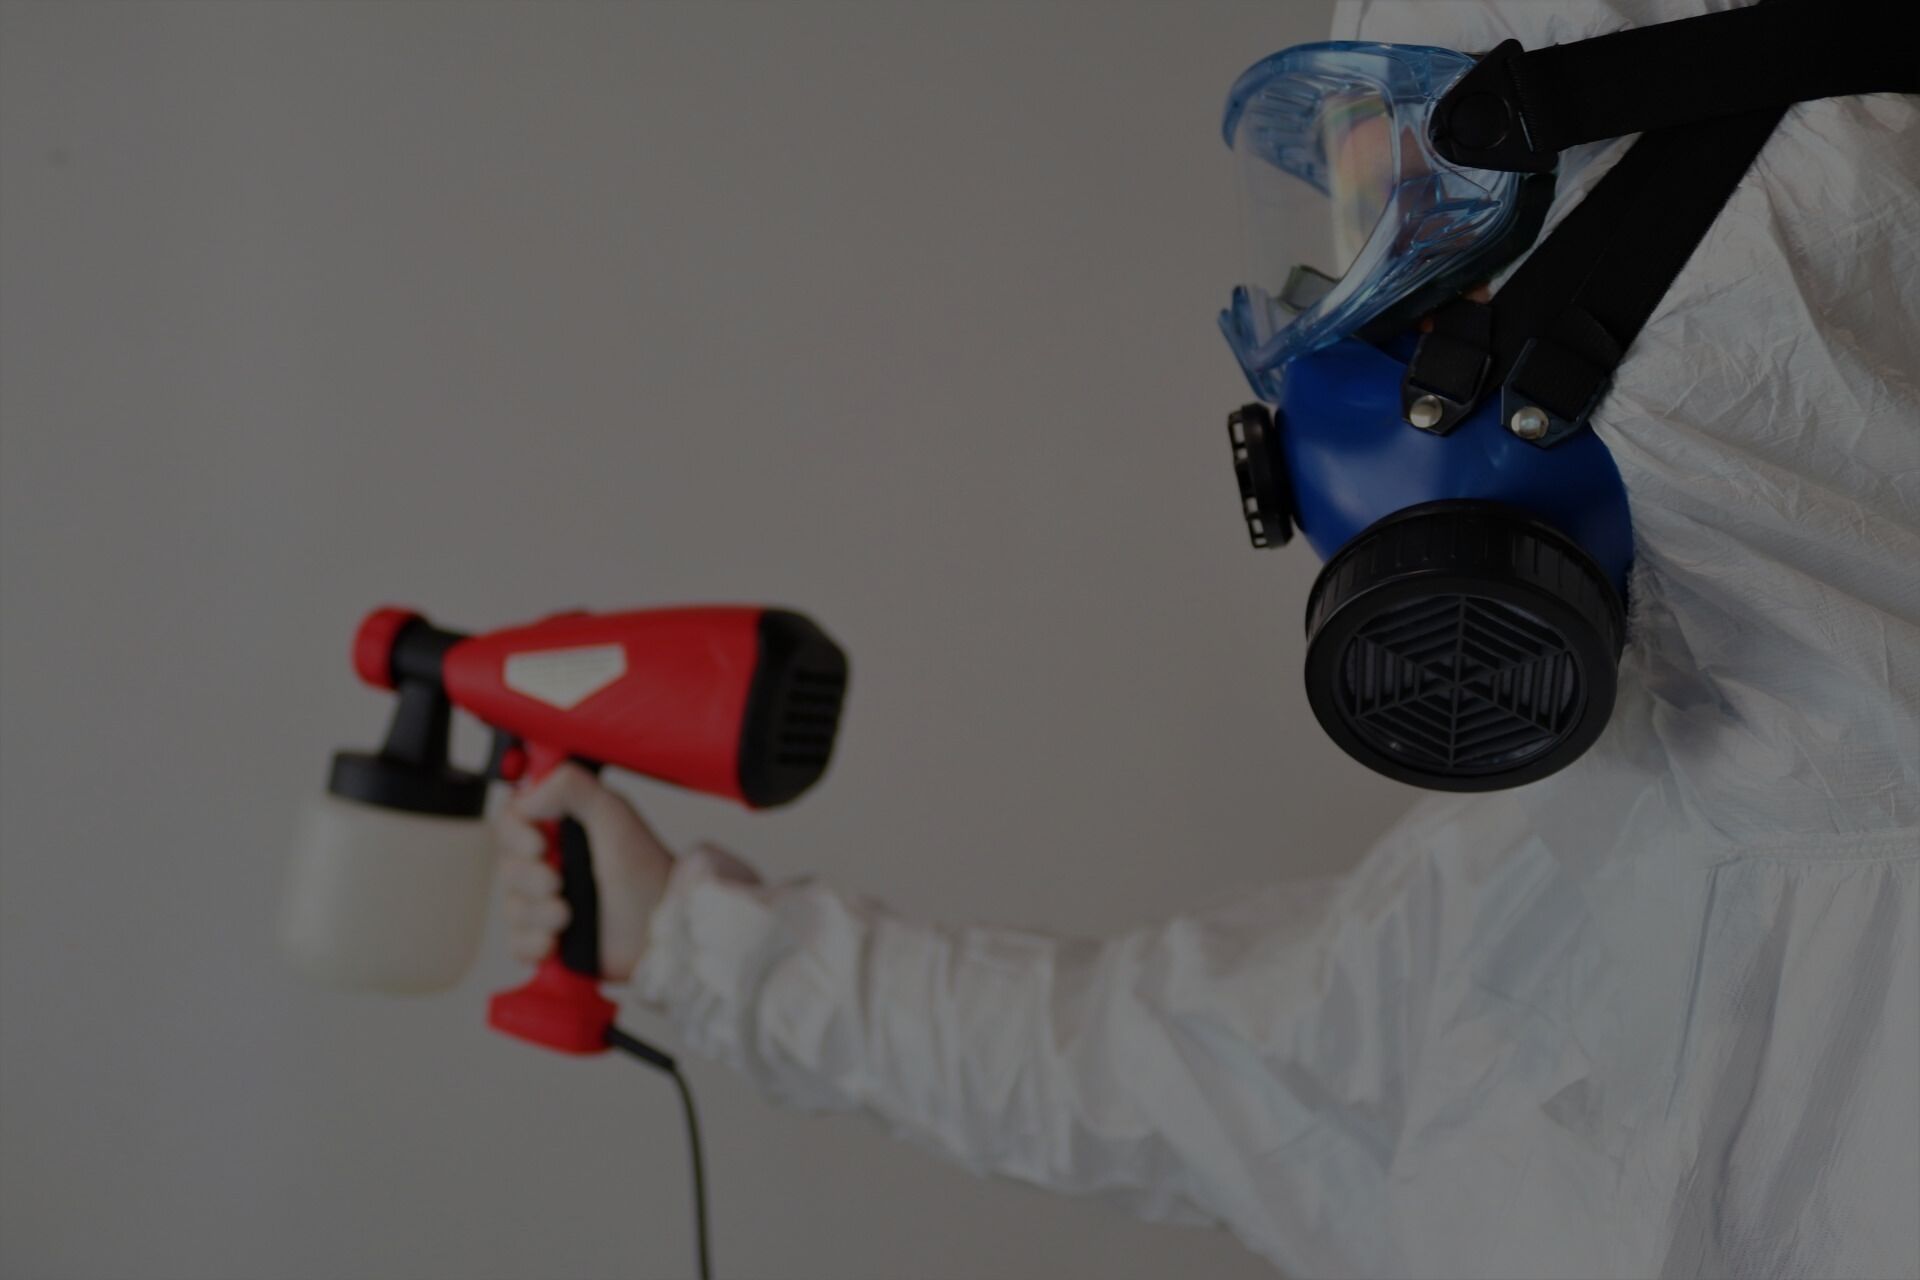 Professional Mold Removal Service